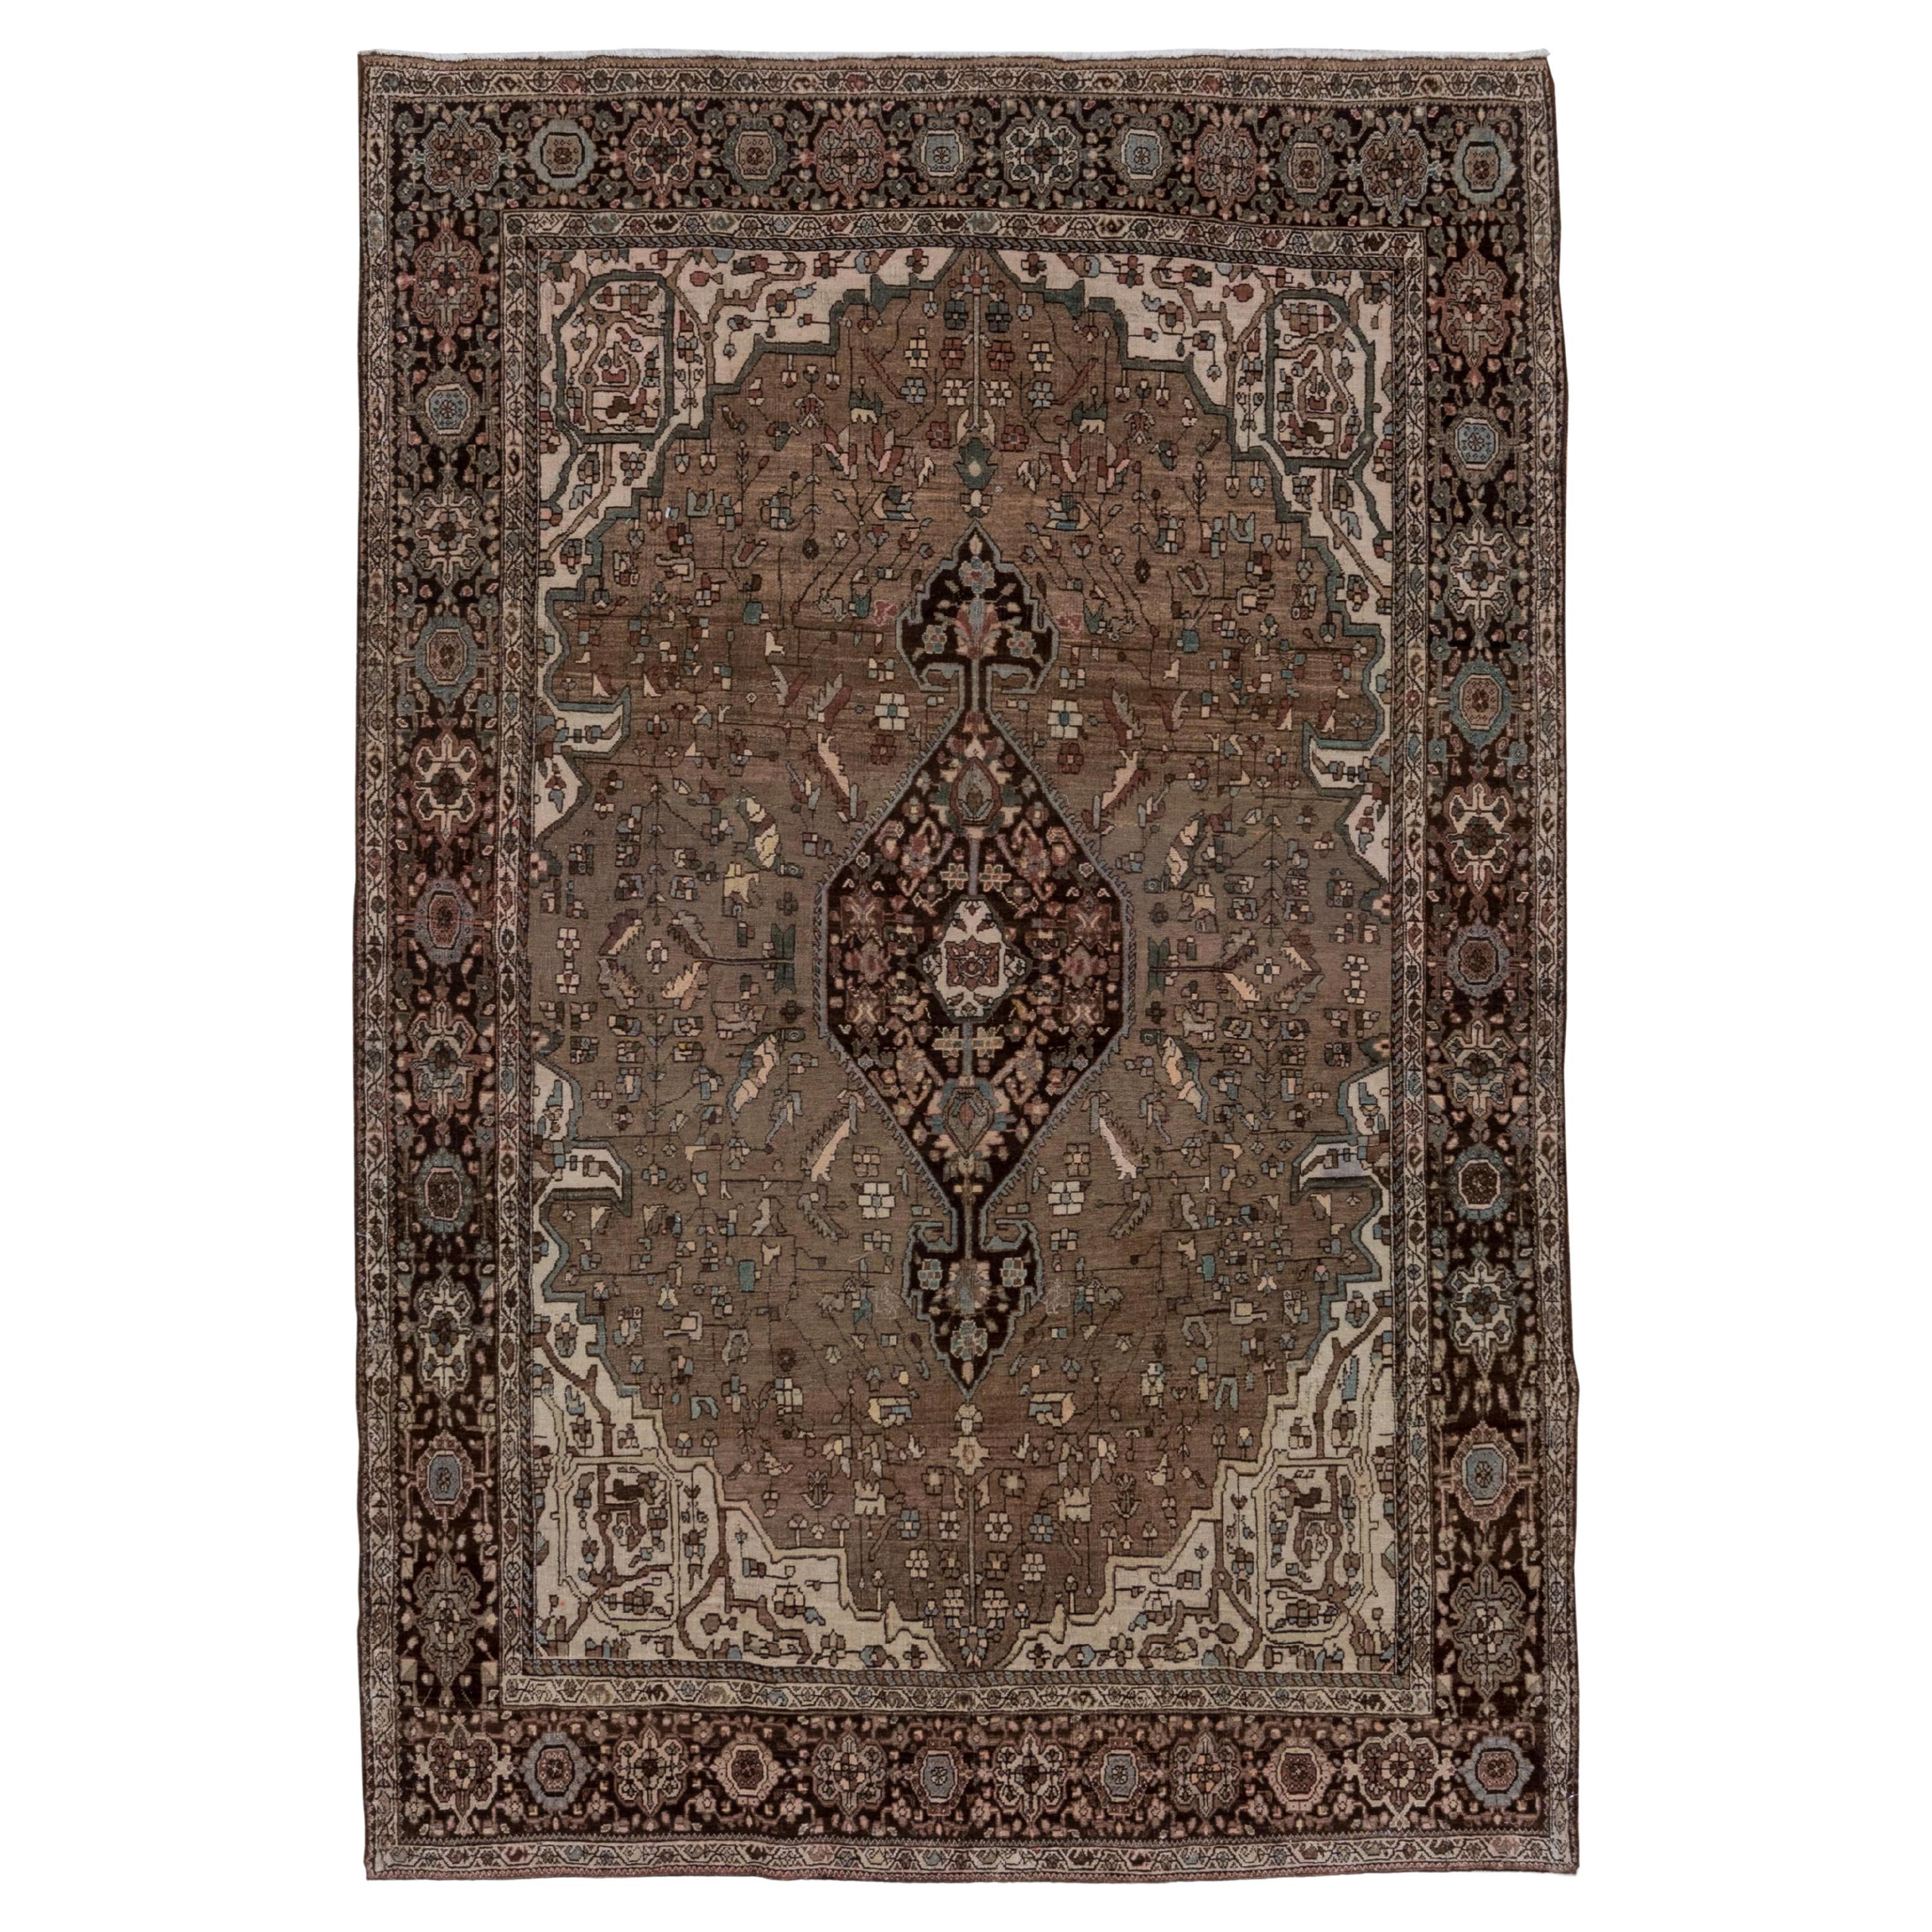 Antique Persian Sarouk Scatter Rug, Brown Field, Small Teal Accents